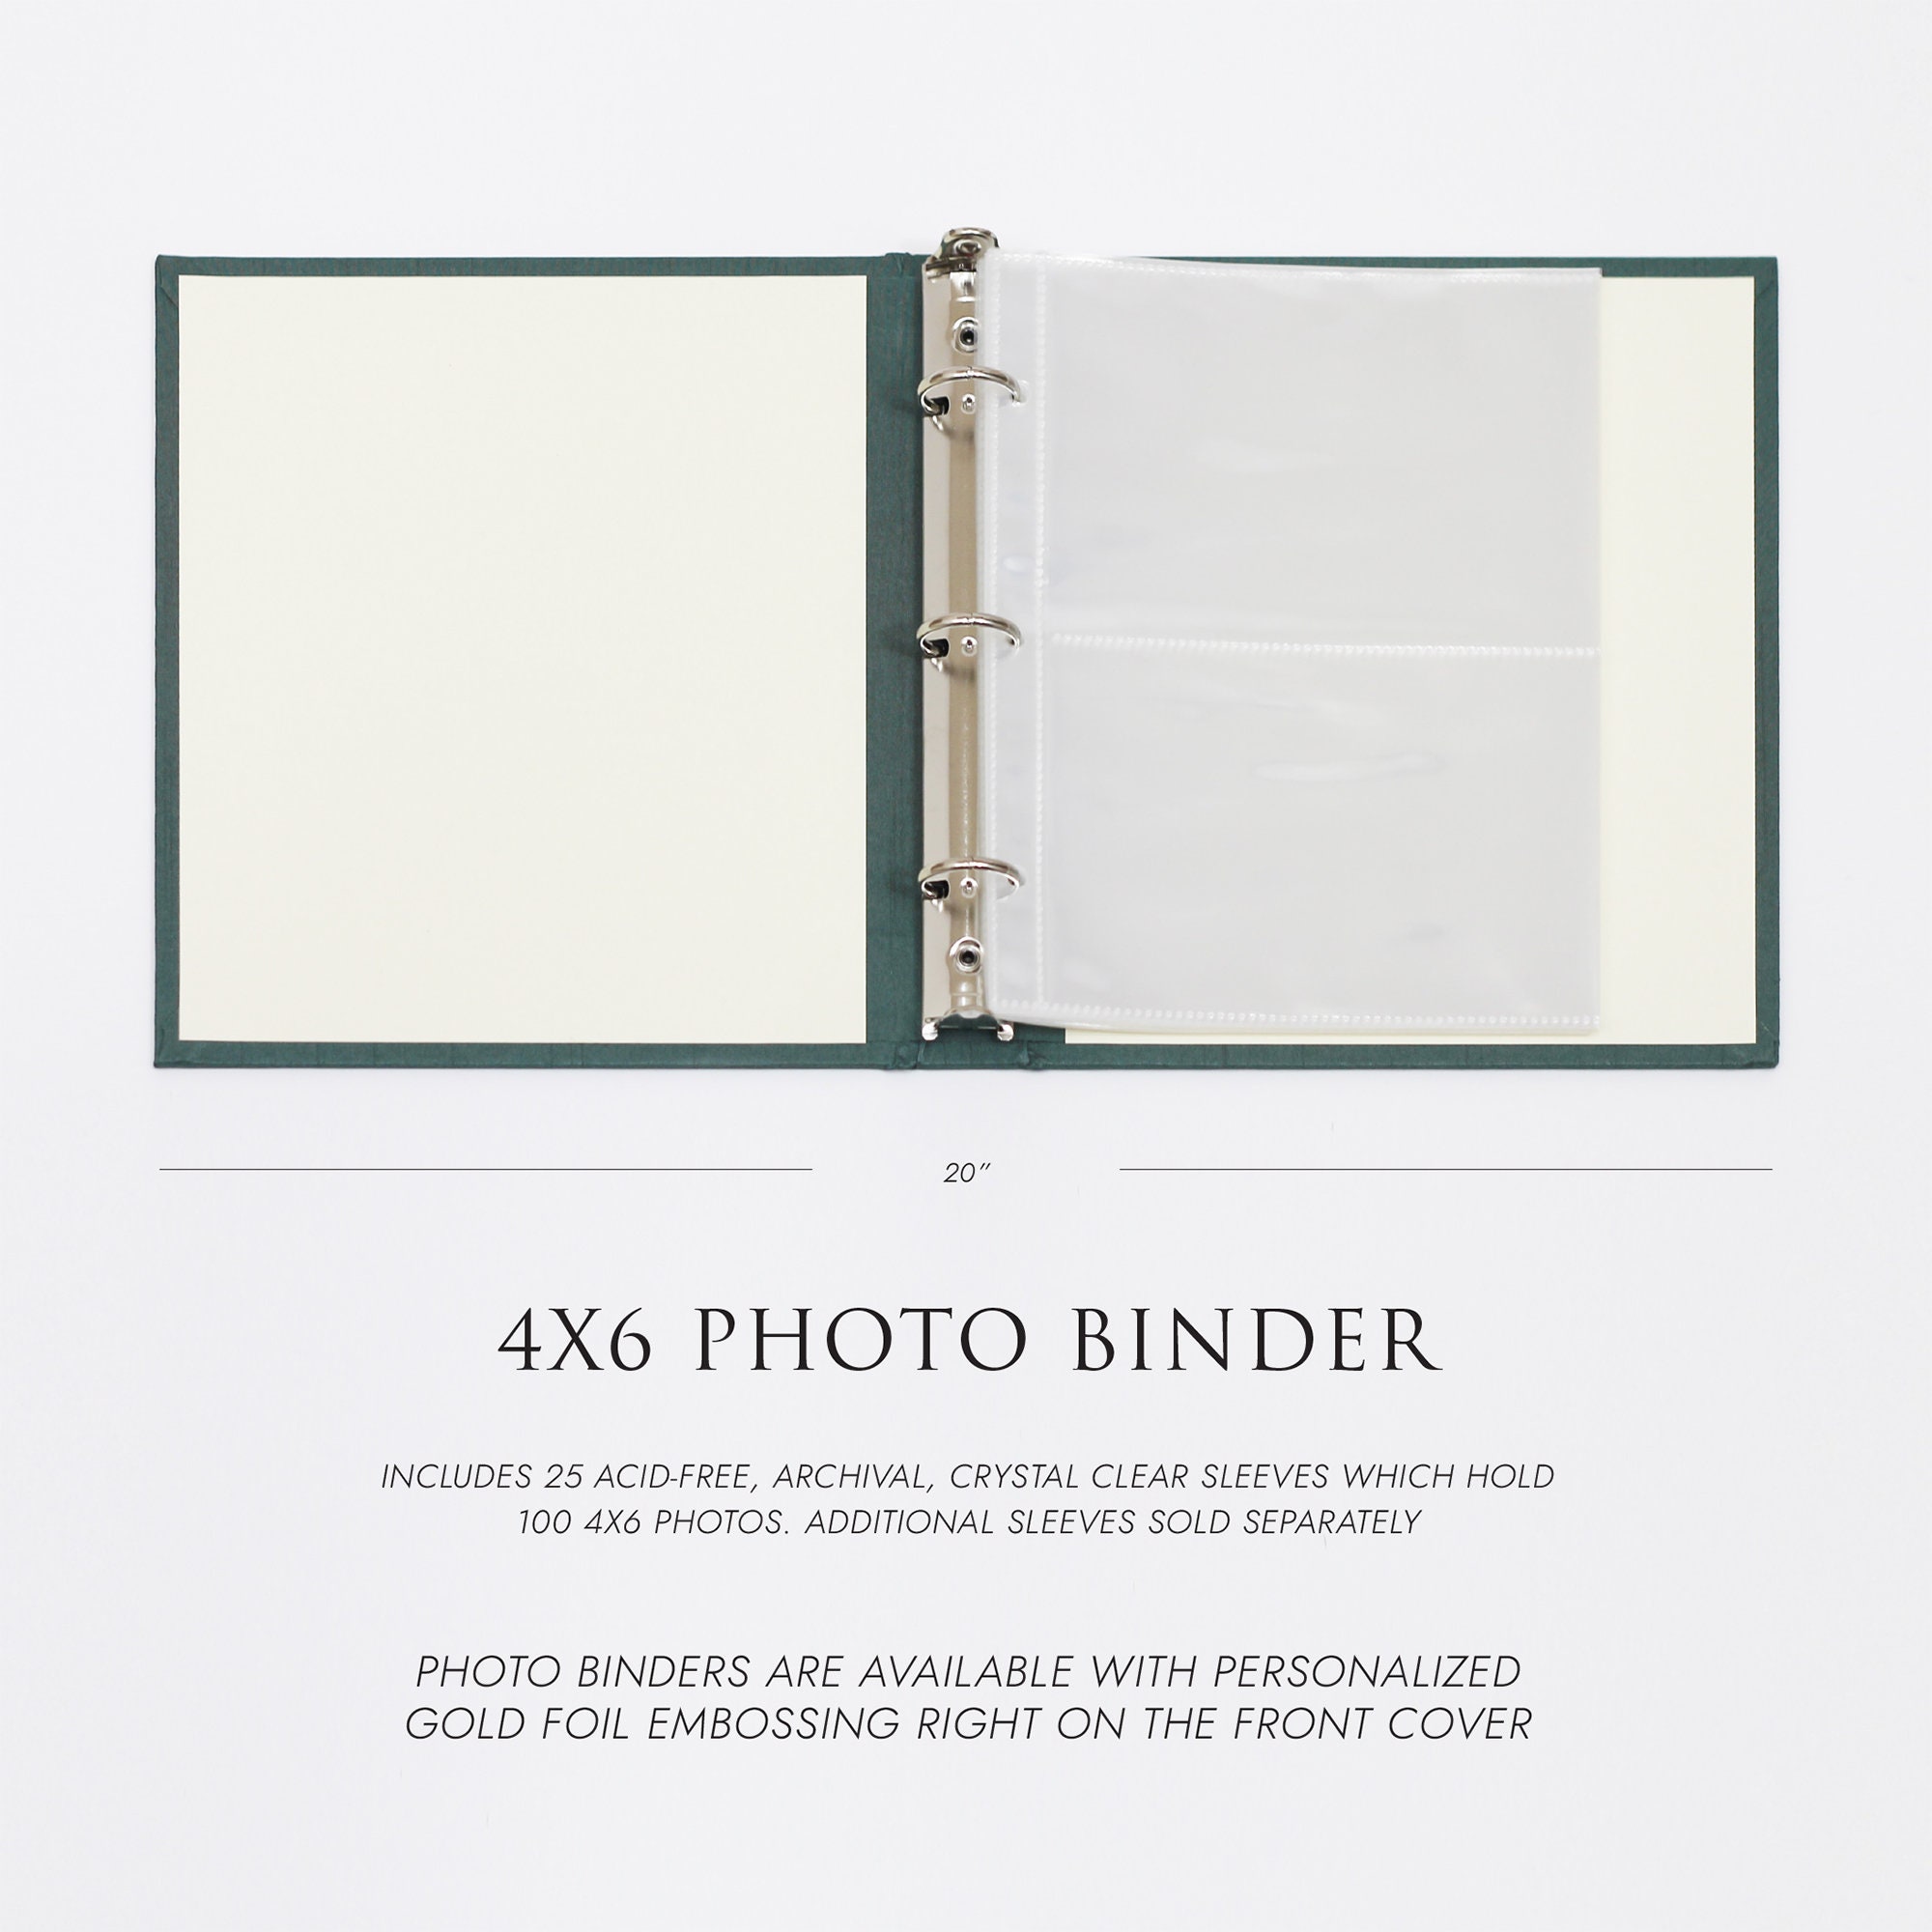 PERSONALIZED 4x6 Photo Binder With Natural Linen Cover Price Includes  Custom Gold Foil Embossing Holds up to 200 Photos 1 Inch Rings 